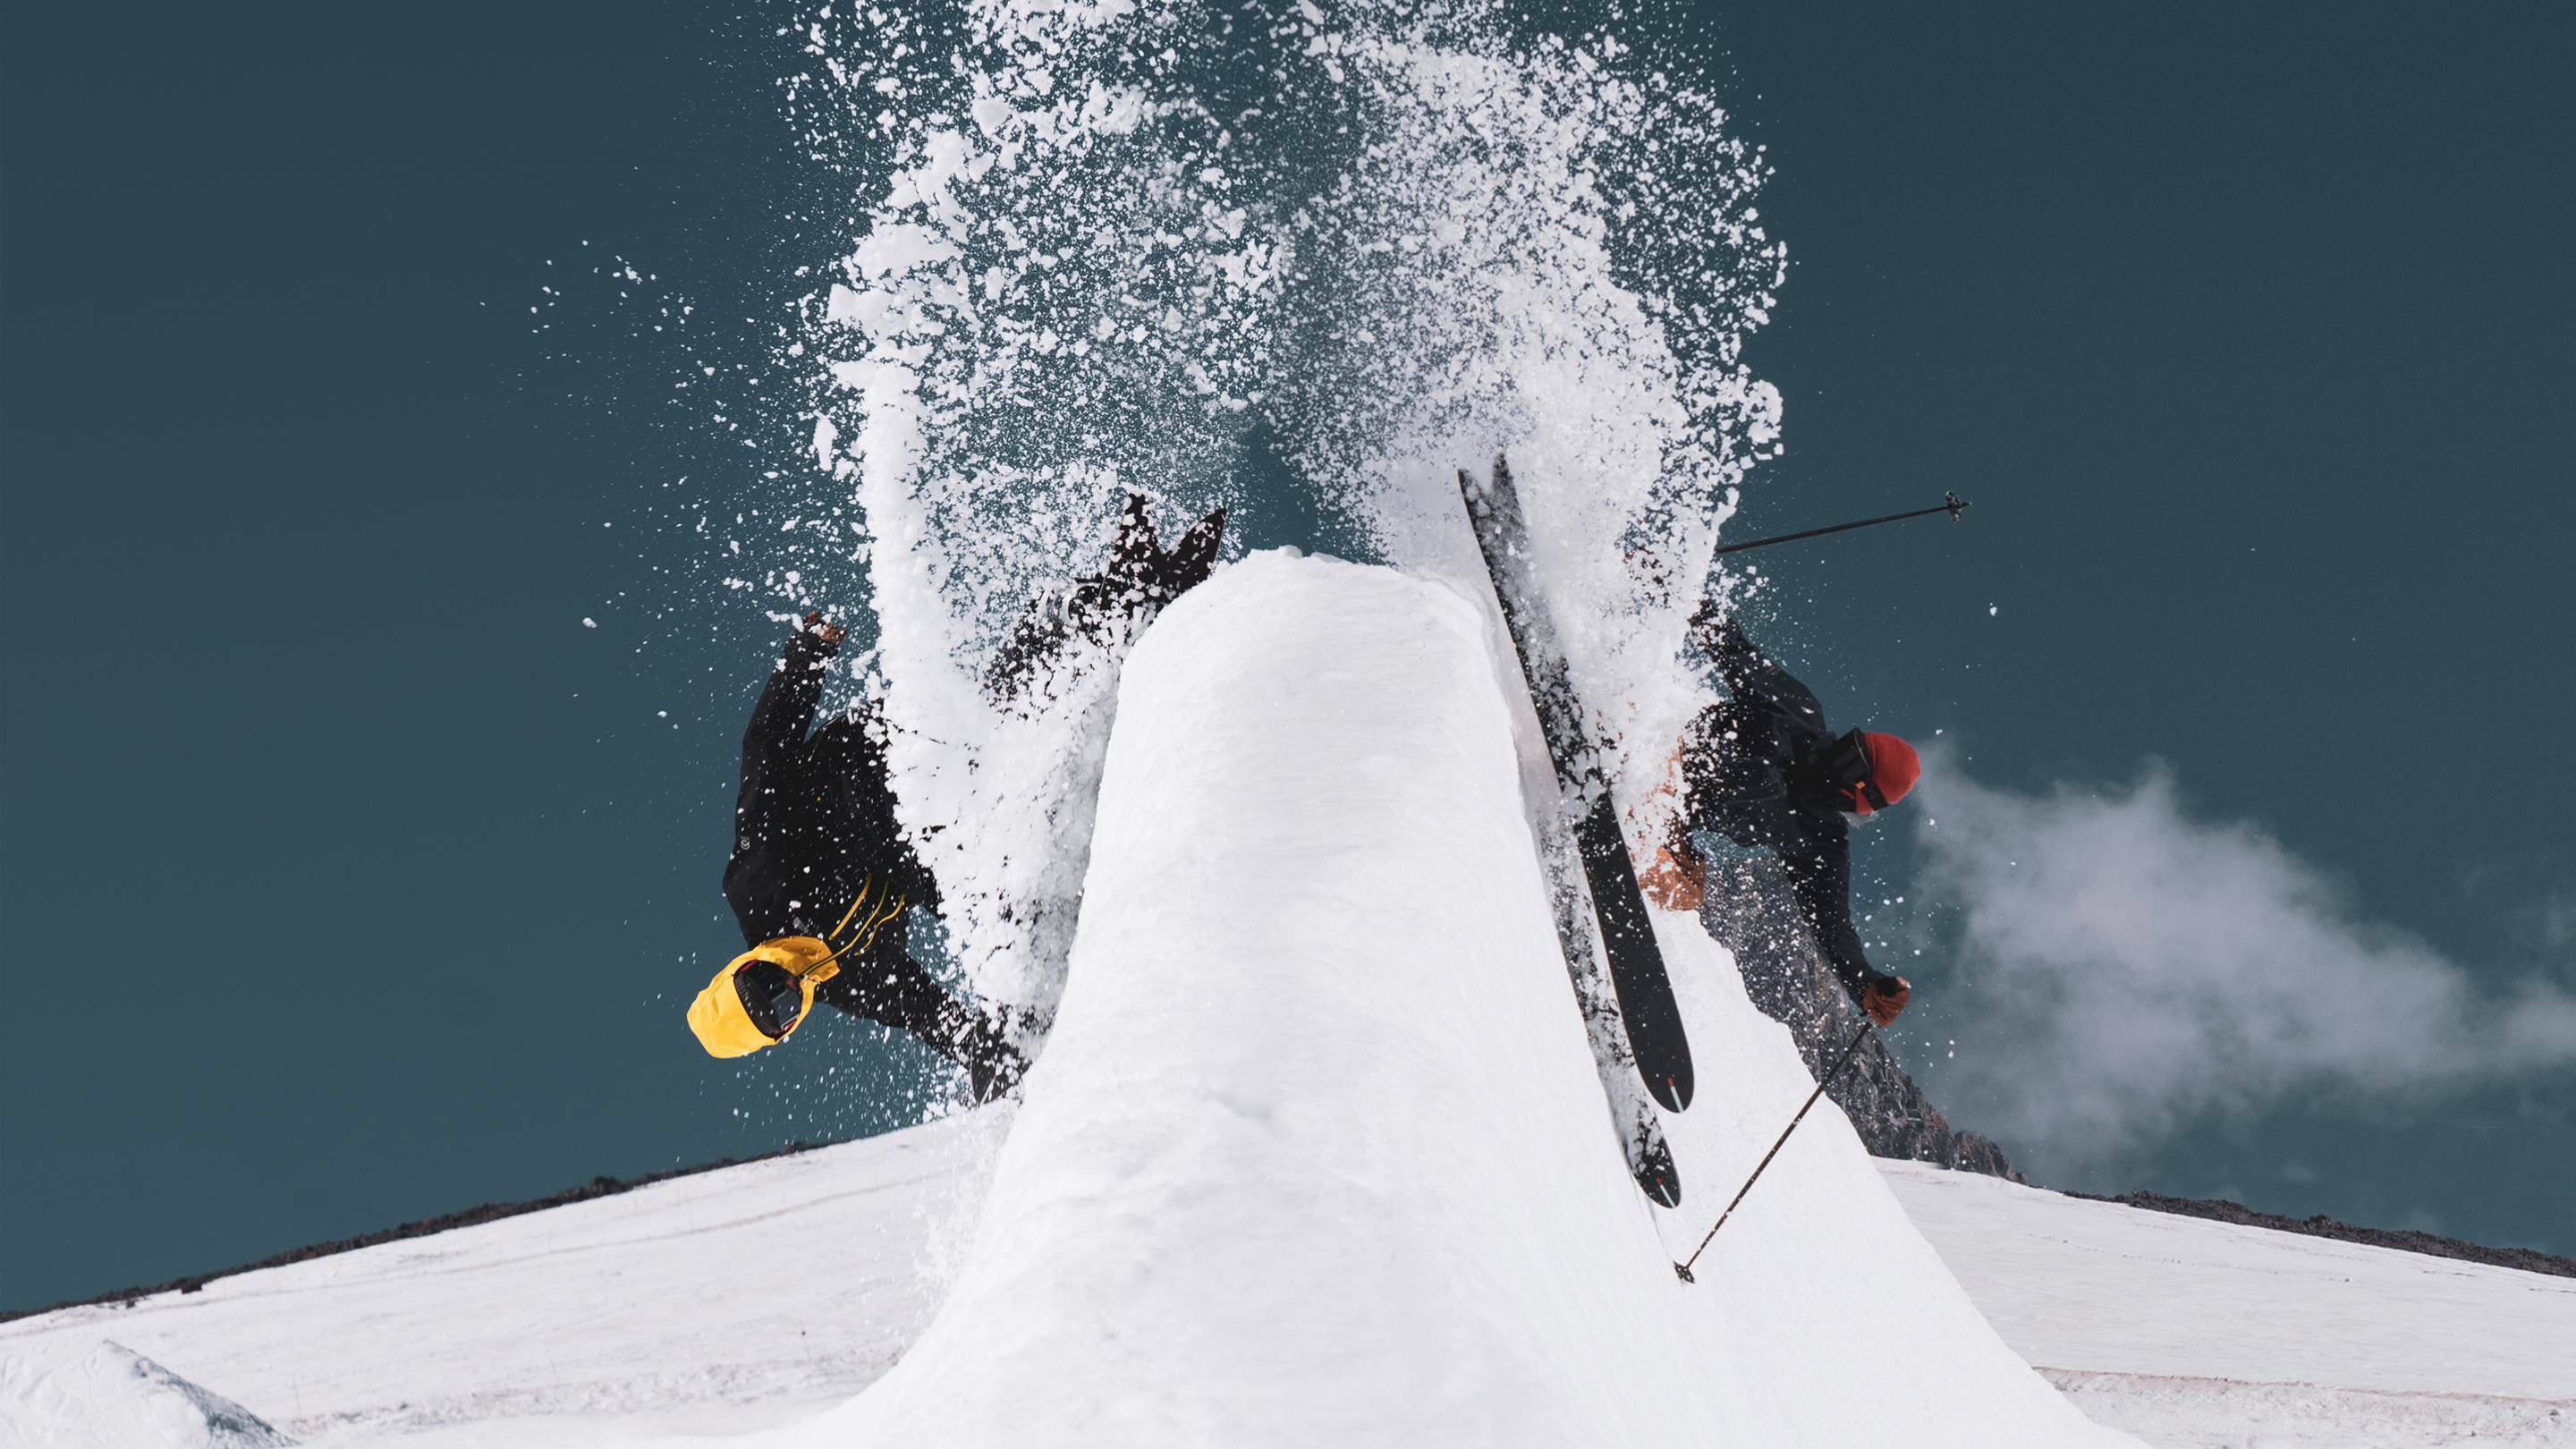 forma shapes | snowboards and skis designed for soft snow with a 